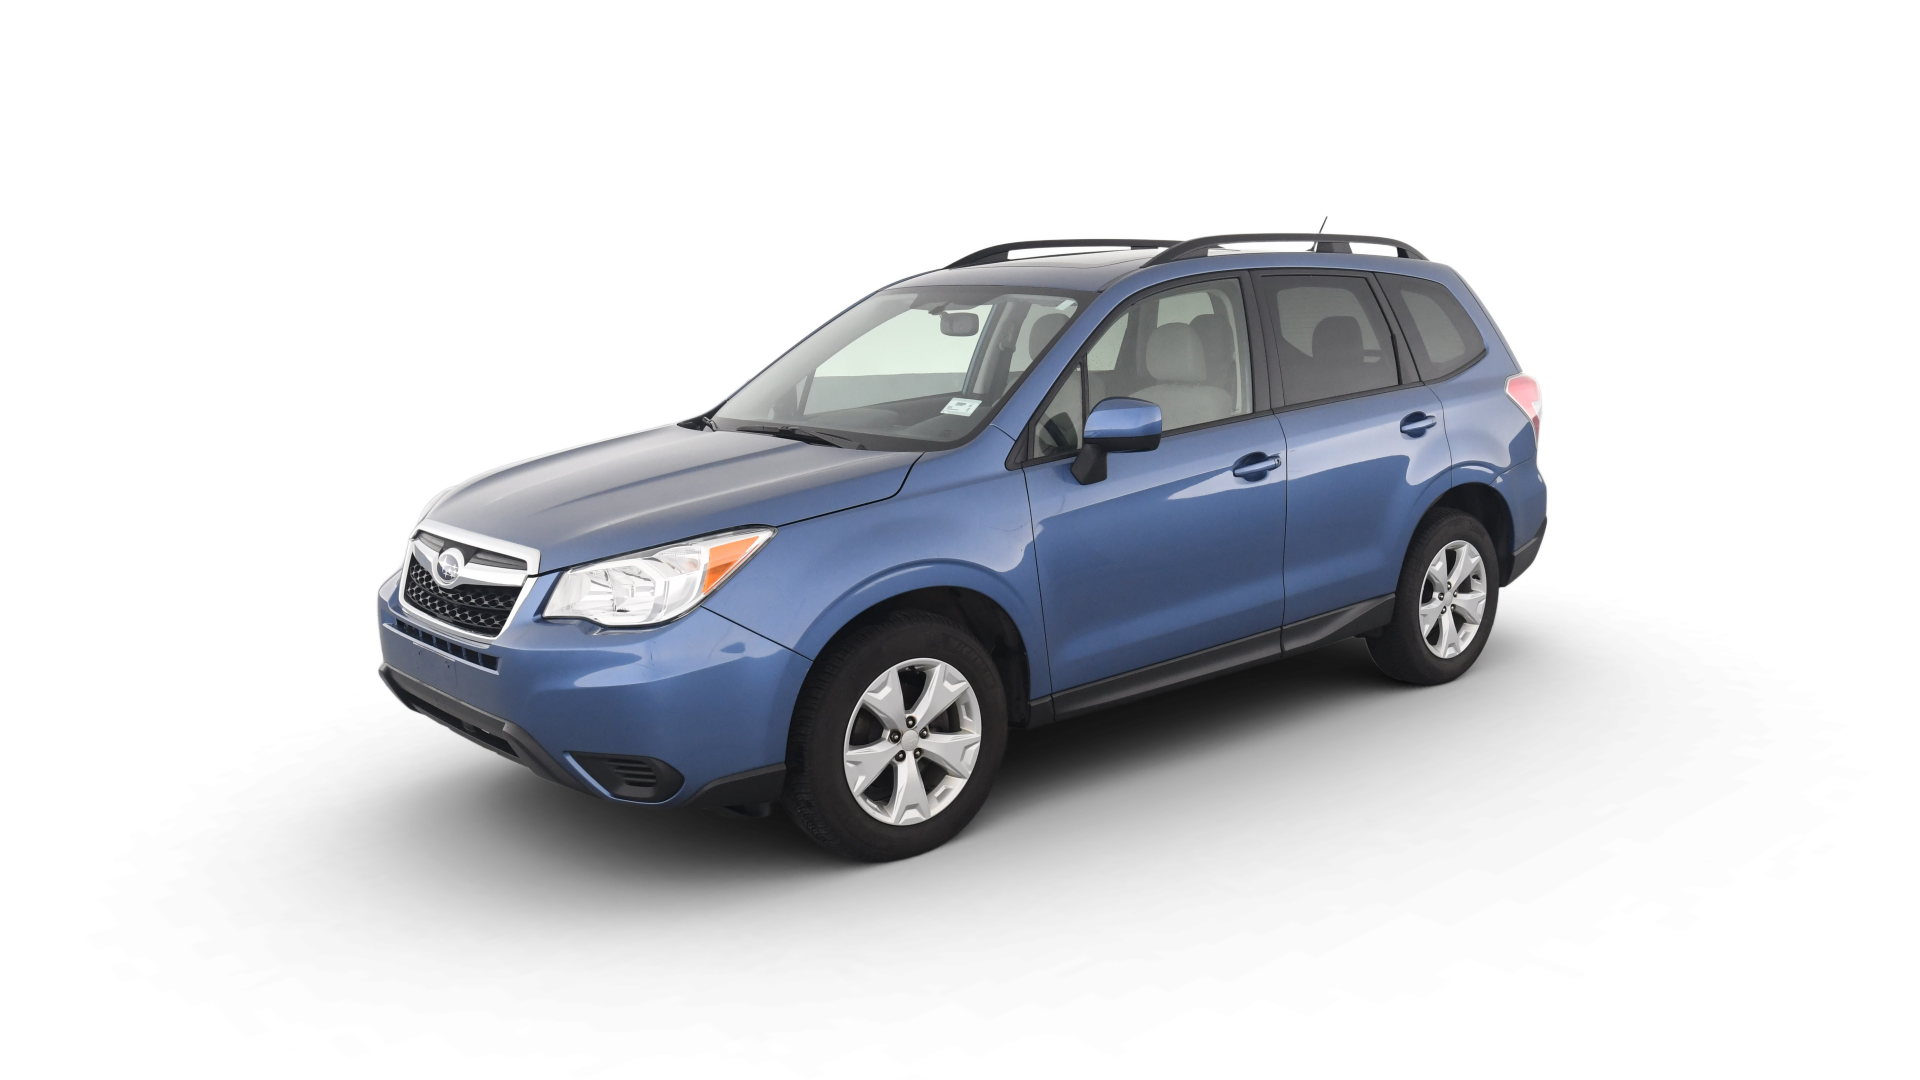 Used 2015 Subaru Forester For Sale Online | Carvana